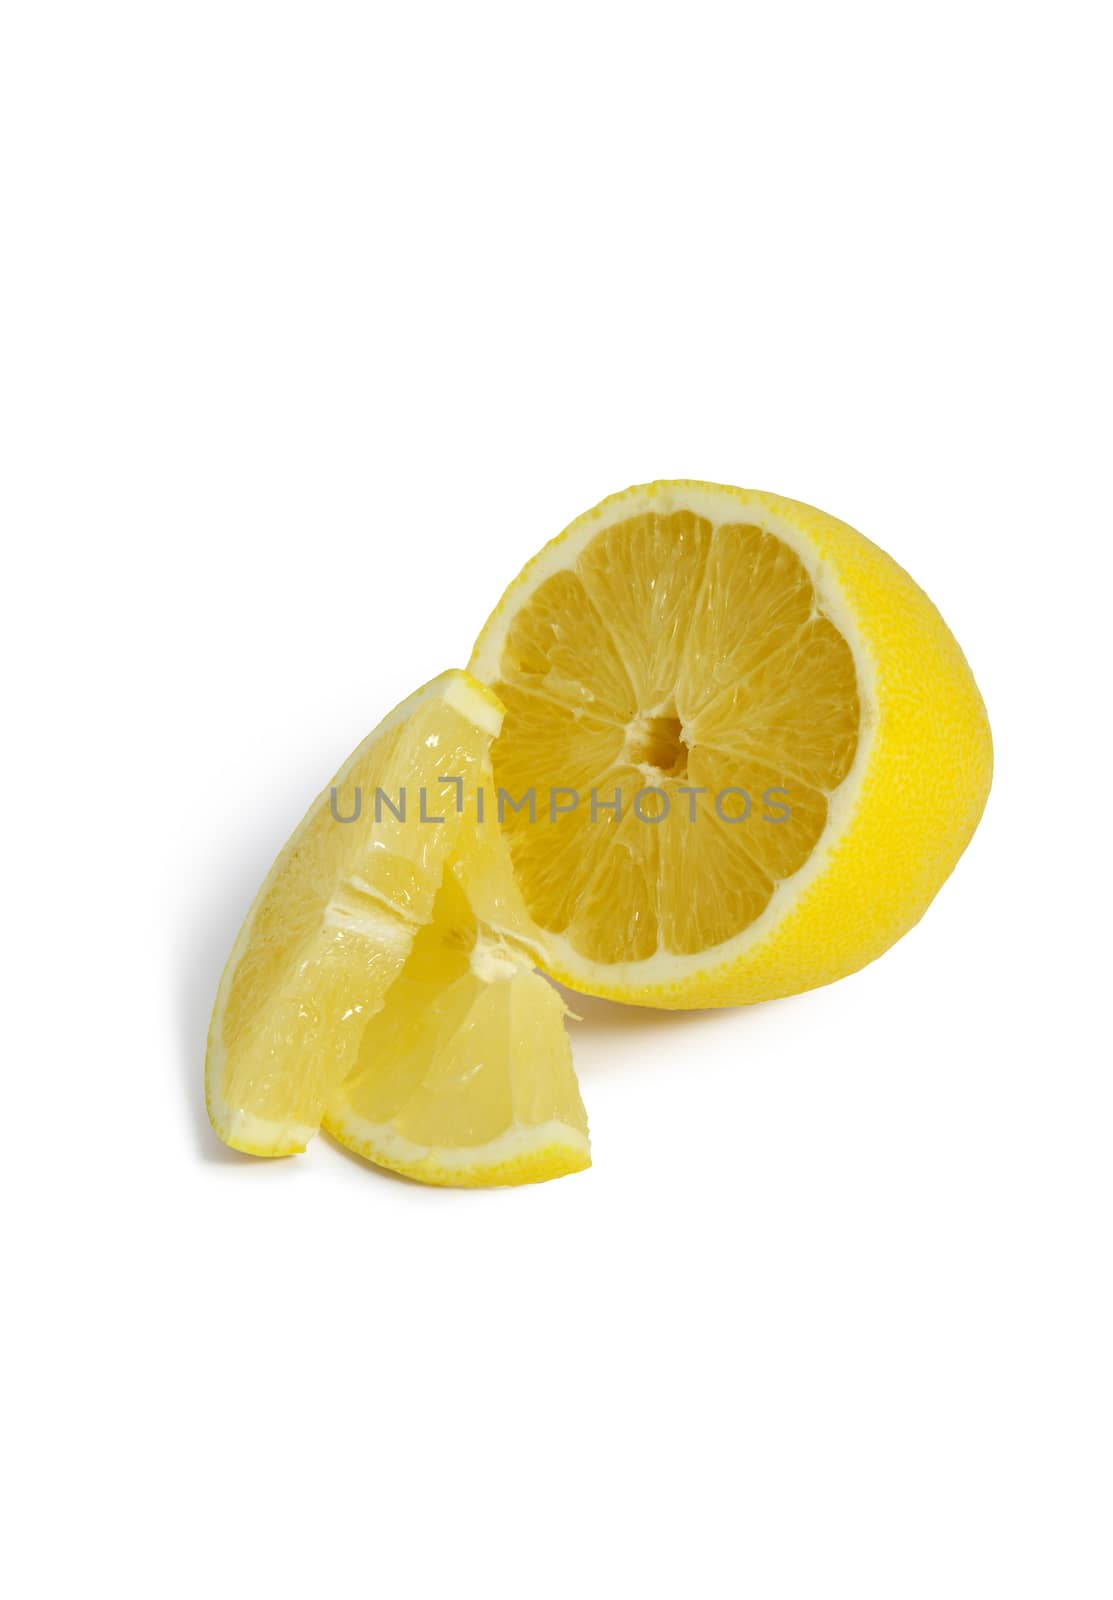 Lemon slices on a isolated white background. With clipping path